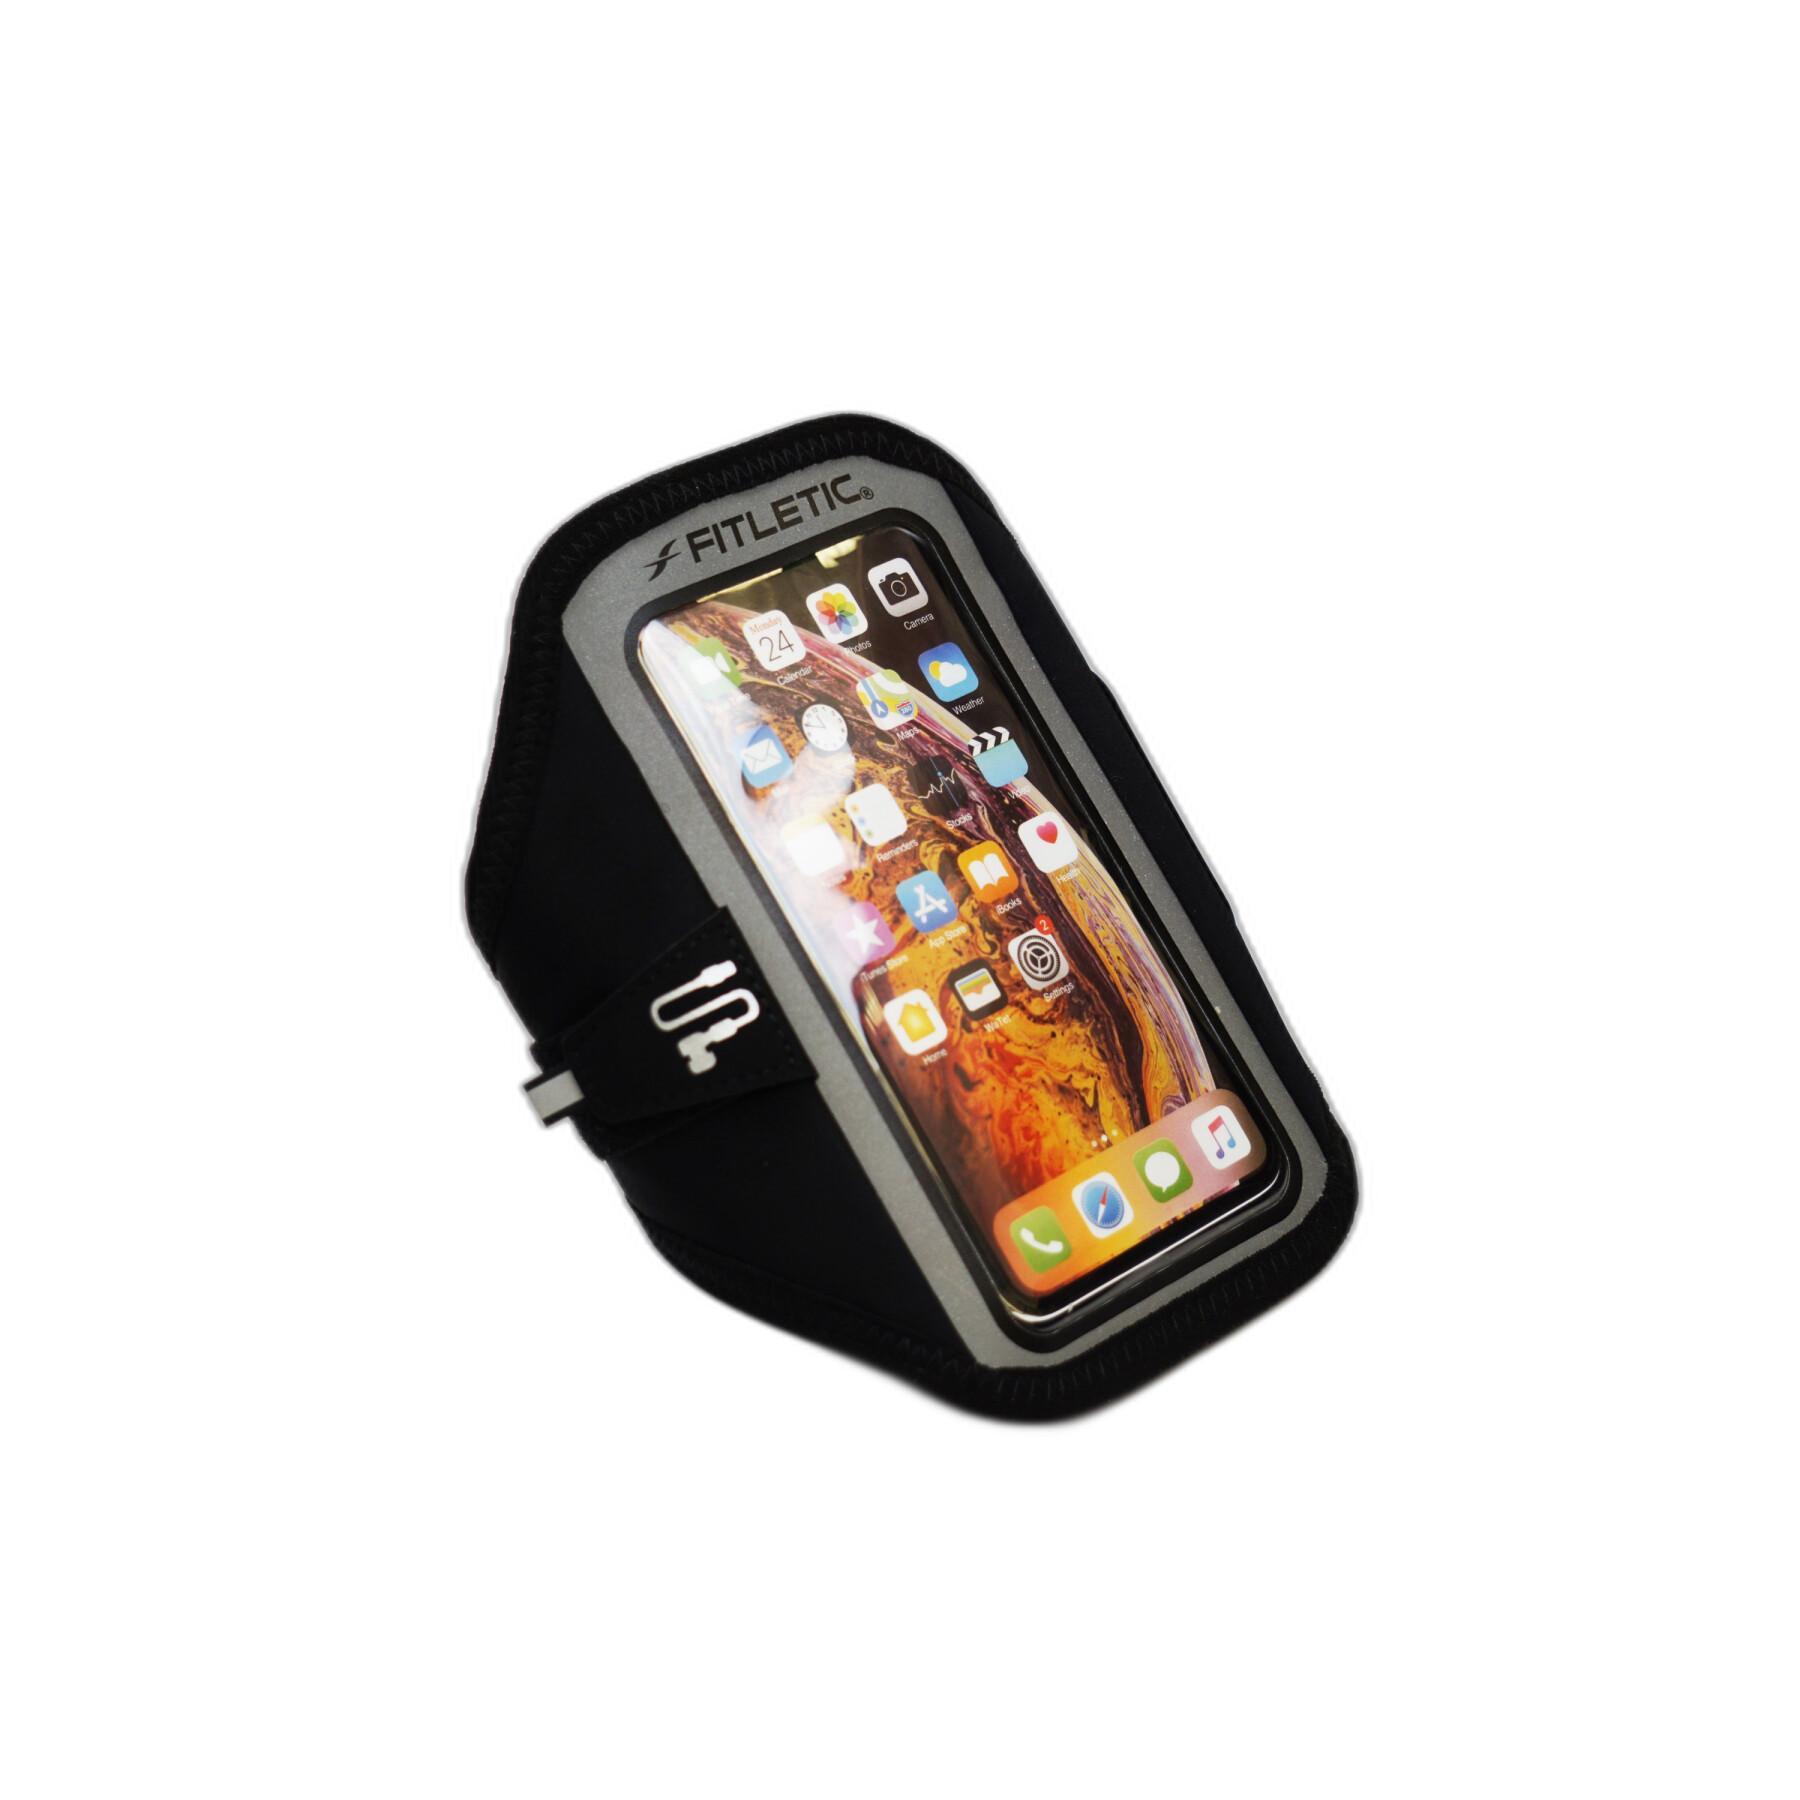 Flexible armband forte plus with window for large smartphone Fitletic